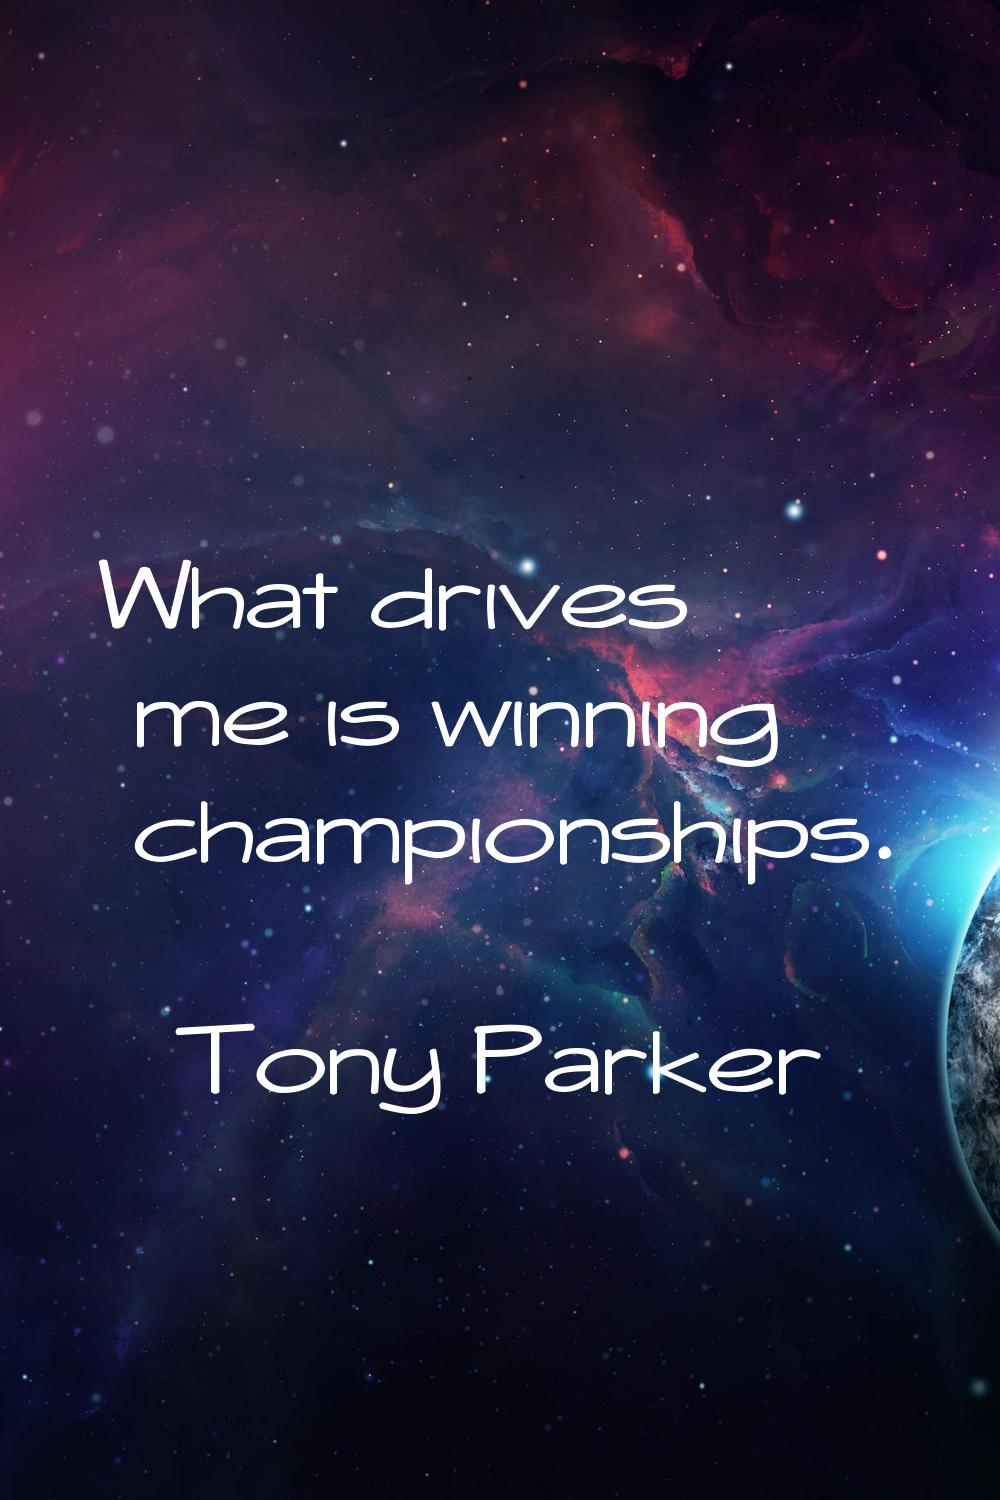 What drives me is winning championships.